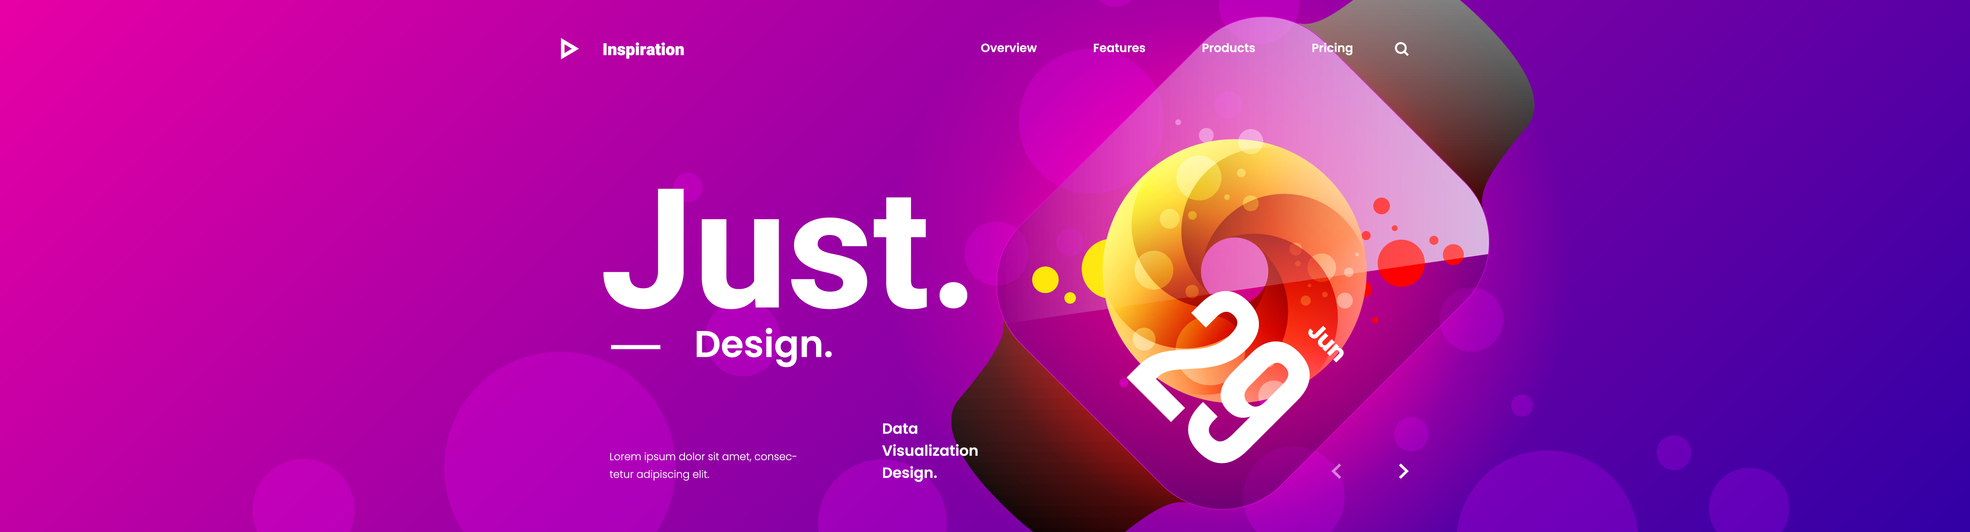 website design in purple with a smart watch illustration